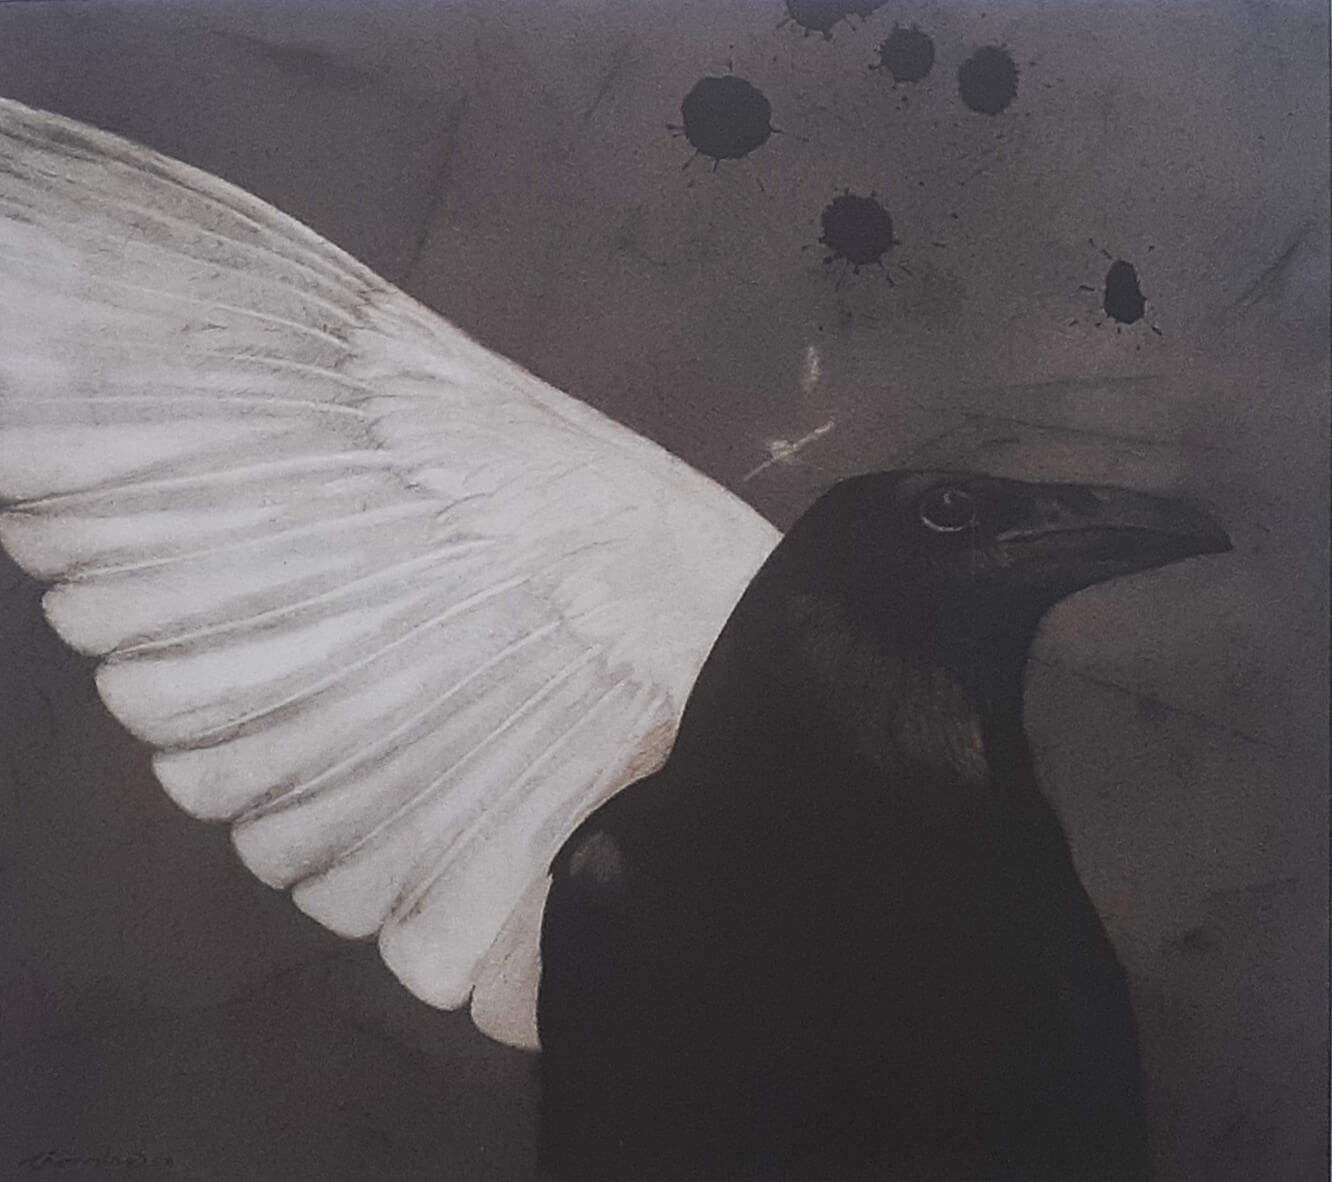 CHANDRA BHATTACHARYA THE WING SPAN ACRYLIC ON CANVAS 36x 32 IN